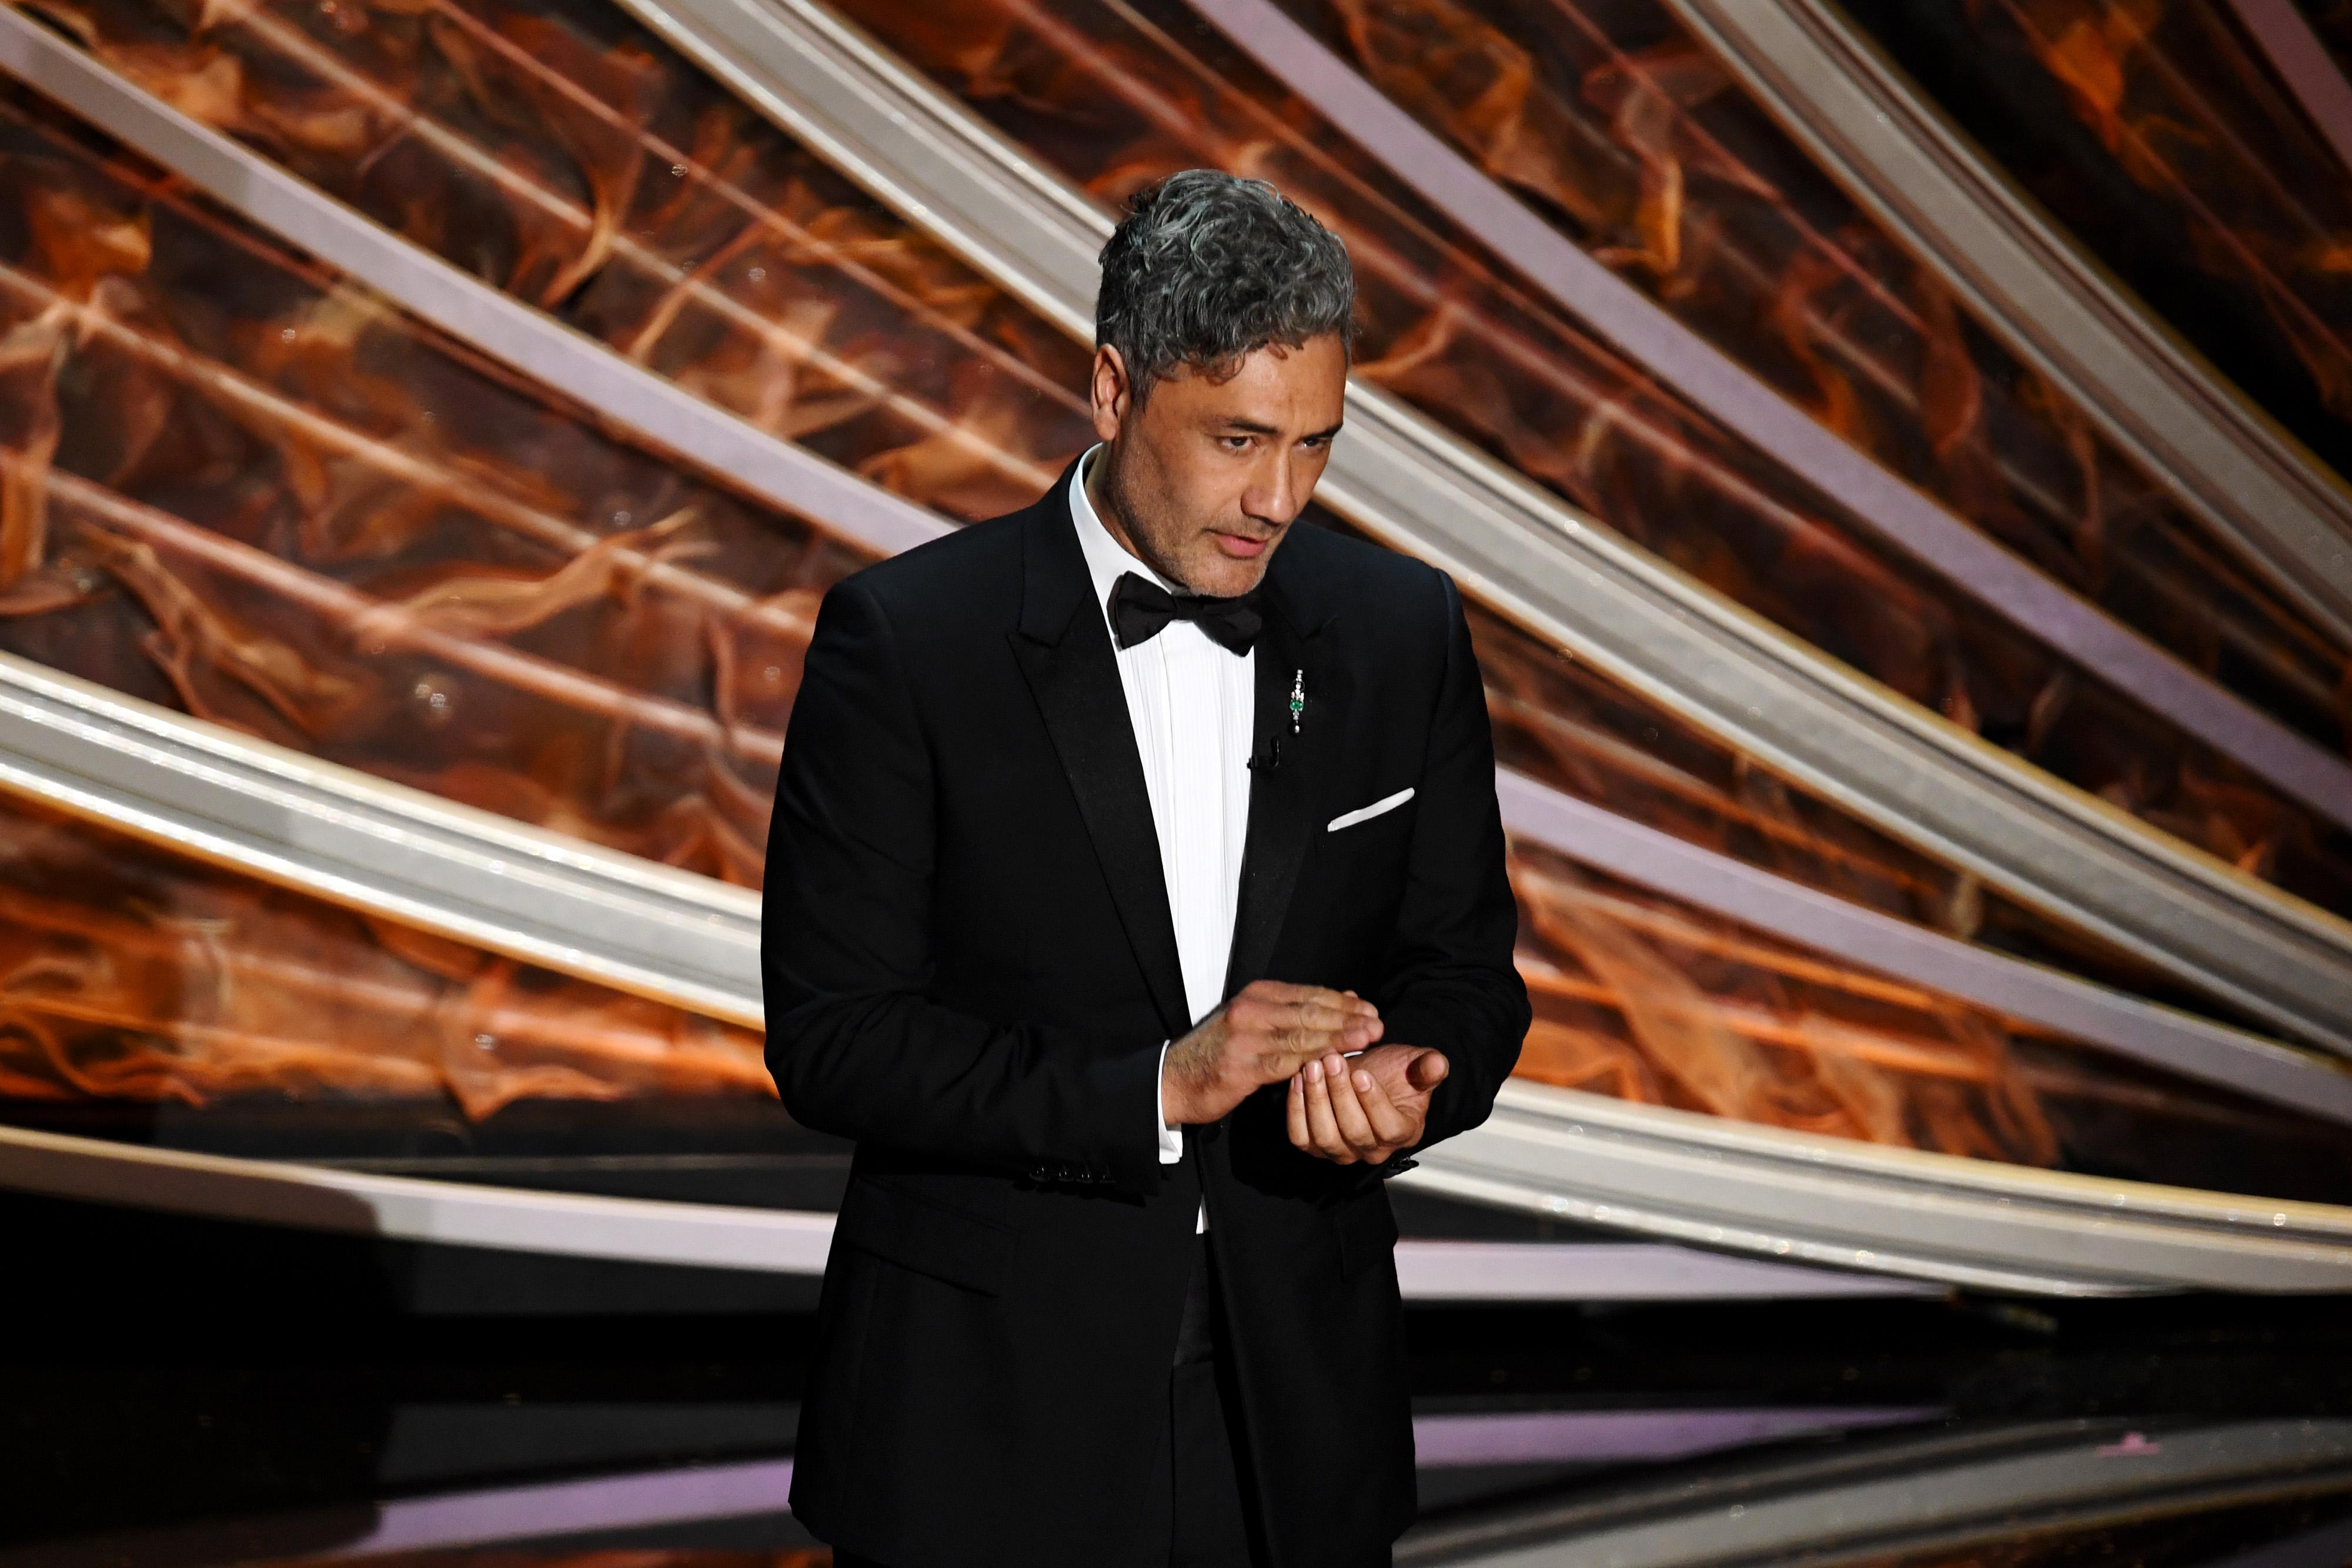 Taika Waititi, in a tux, speaking on a stage.